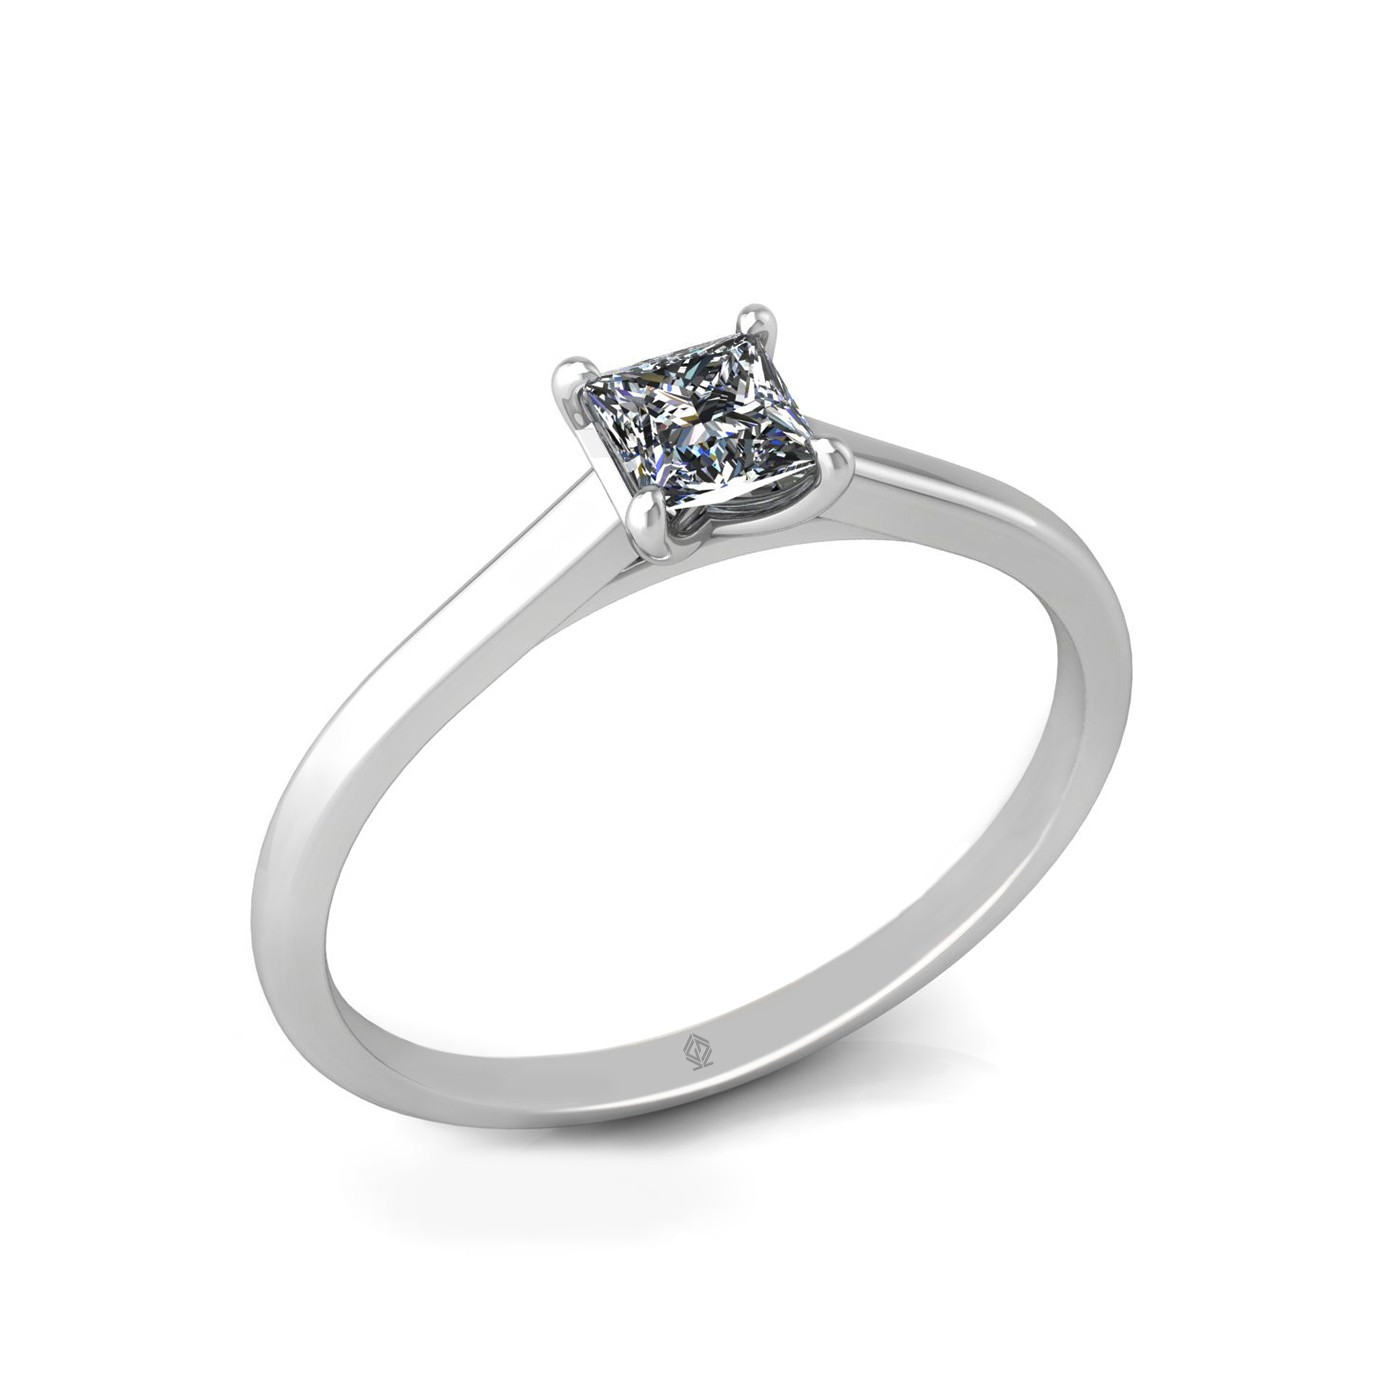 18k white gold  0,30 ct 4 prongs solitaire princess cut diamond engagement ring with whisper thin band